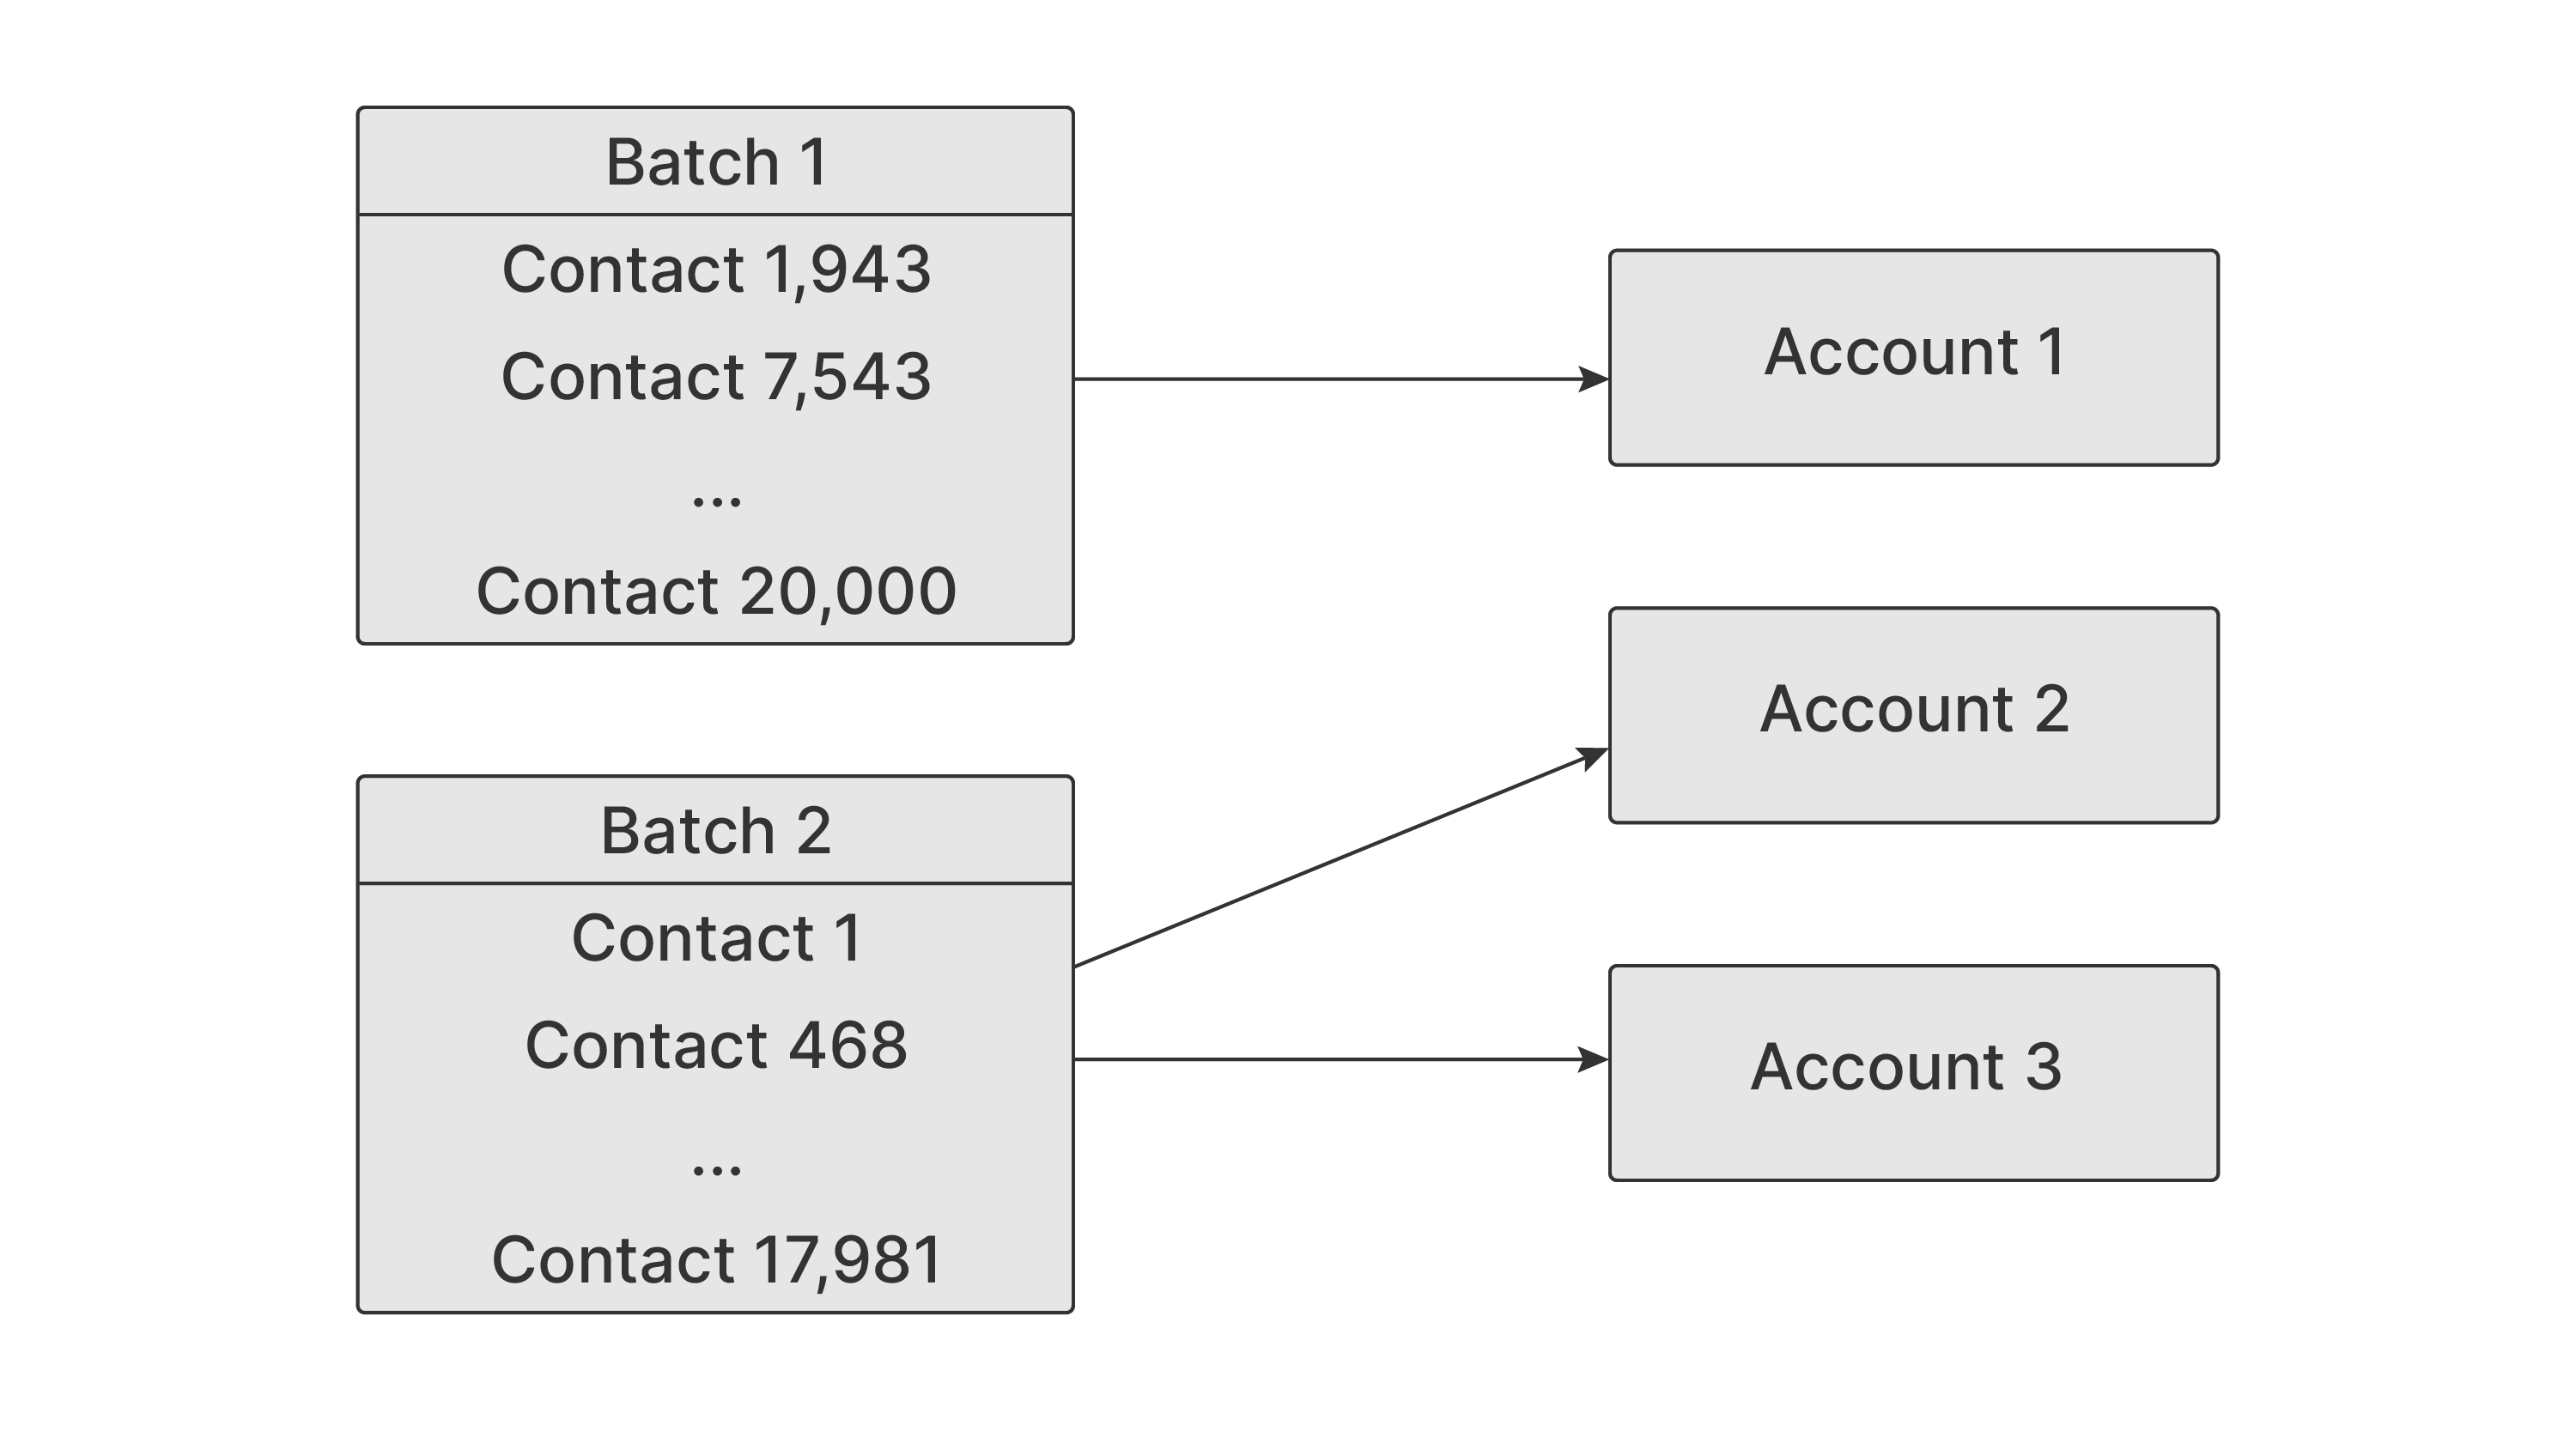 Diagram shows one batch deploying to one account, and one batch deploying to the other two accounts